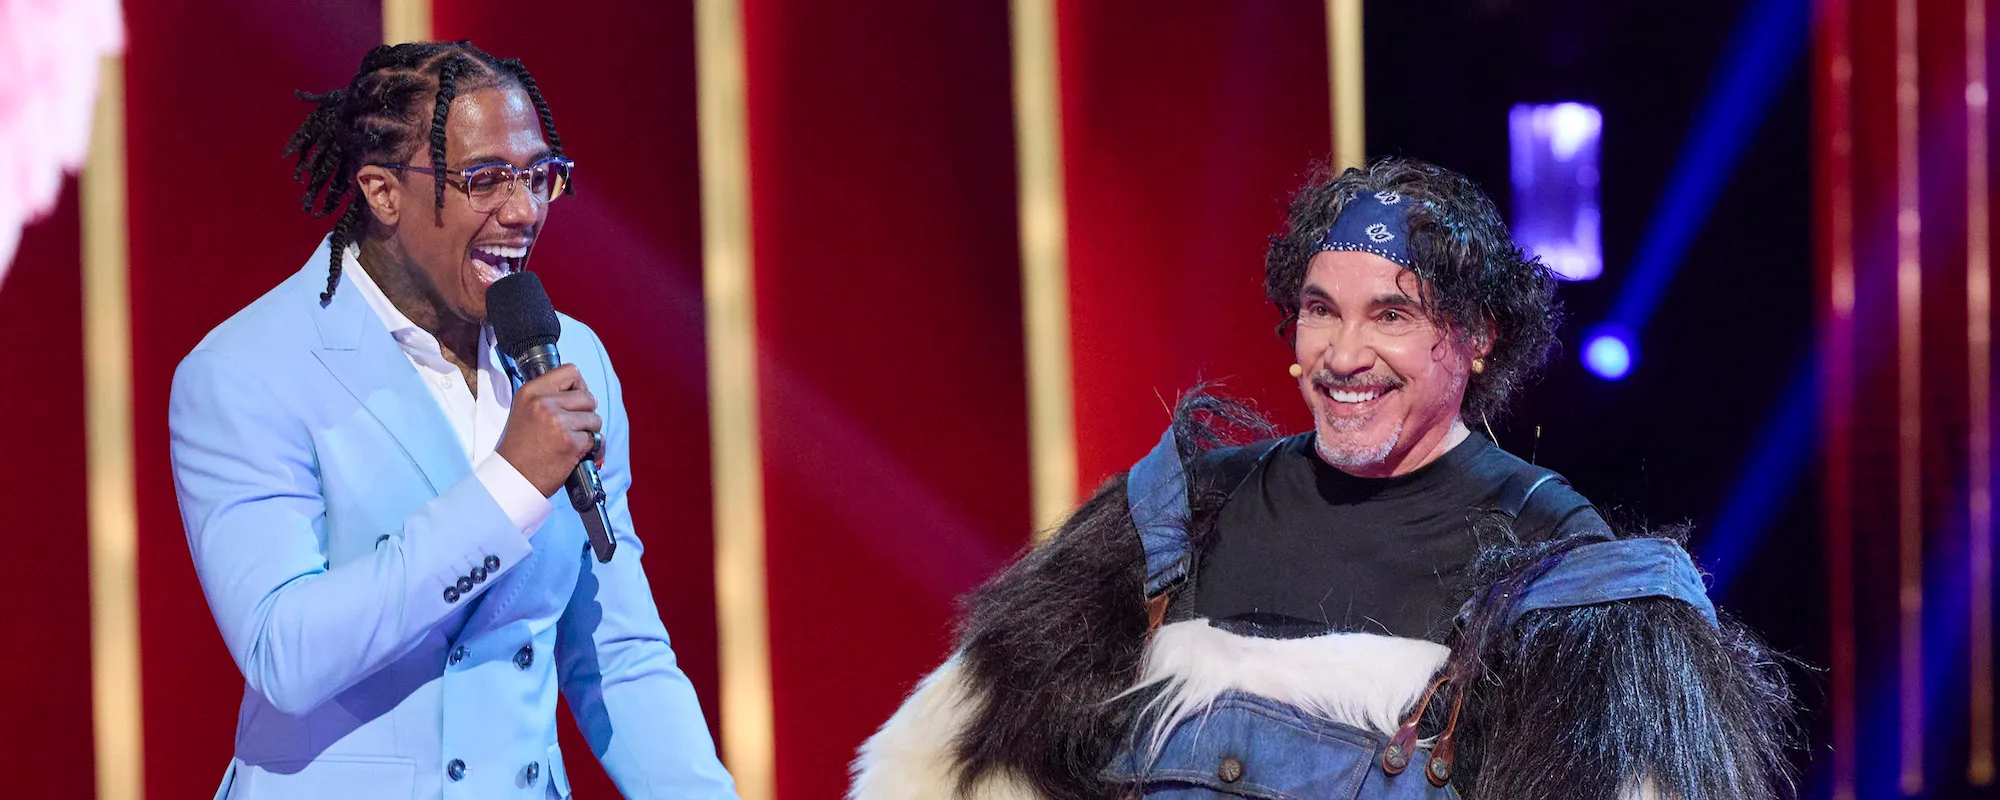 John Oates Gets Unmasked on ‘The Masked Singer’; Reveals Whether He’ll Perform With Daryl Hall Again